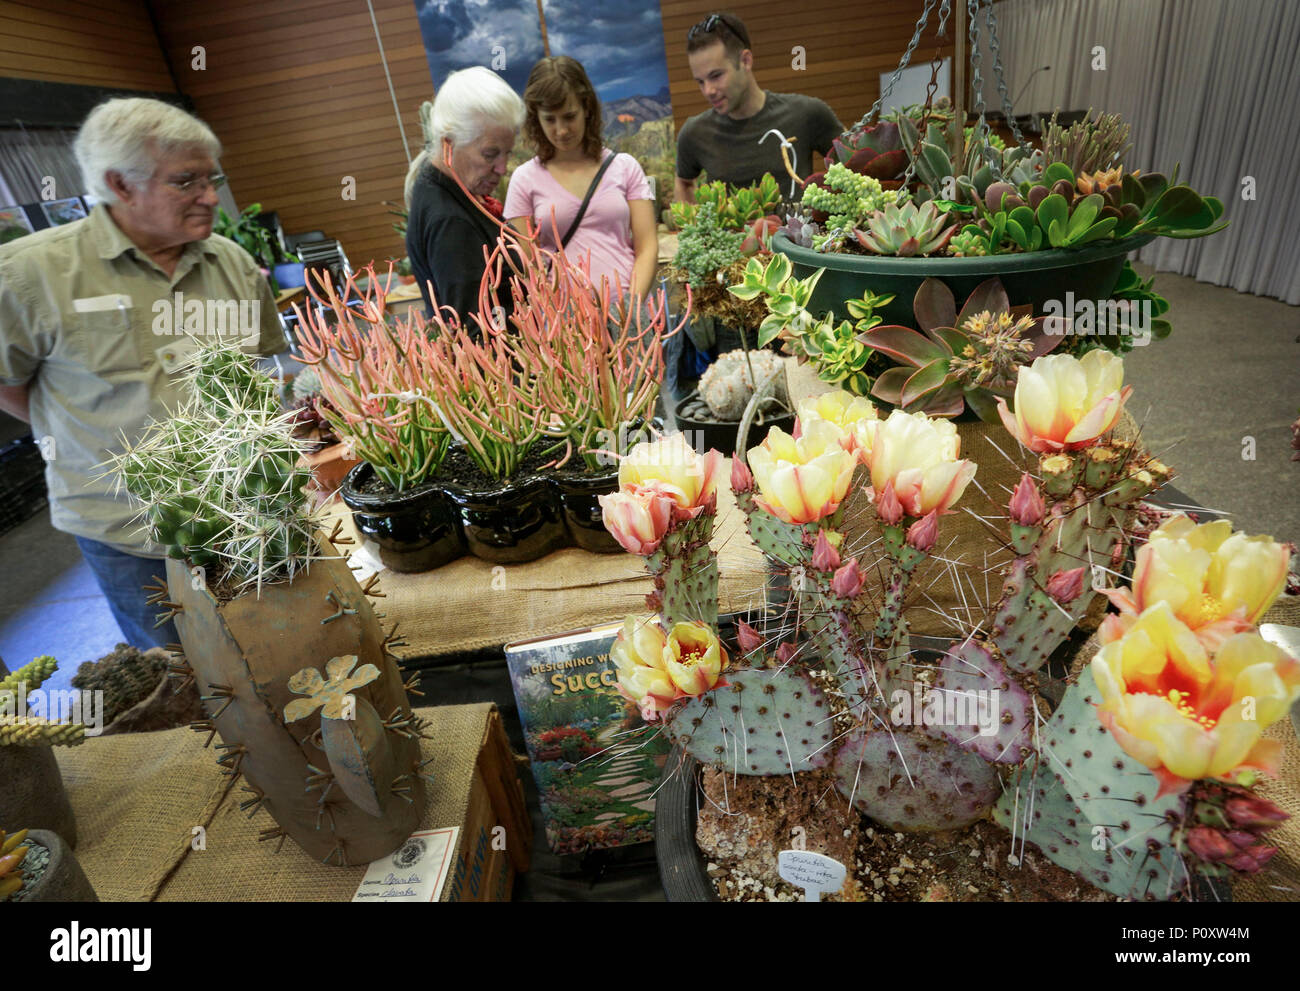 Vancouver, Canada. 9th June, 2018. Visitors look at different cactus and succulent plants at the Vancouver Desert Plant Show in Vancouver, Canada, June 9, 2018. The annual Vancouver Desert Plant Show is a two-day event to provide opportunities for the cactus and succulent plants enthusiasts to show their plants and share planting experiences. Credit: Liang Sen/Xinhua/Alamy Live News Stock Photo